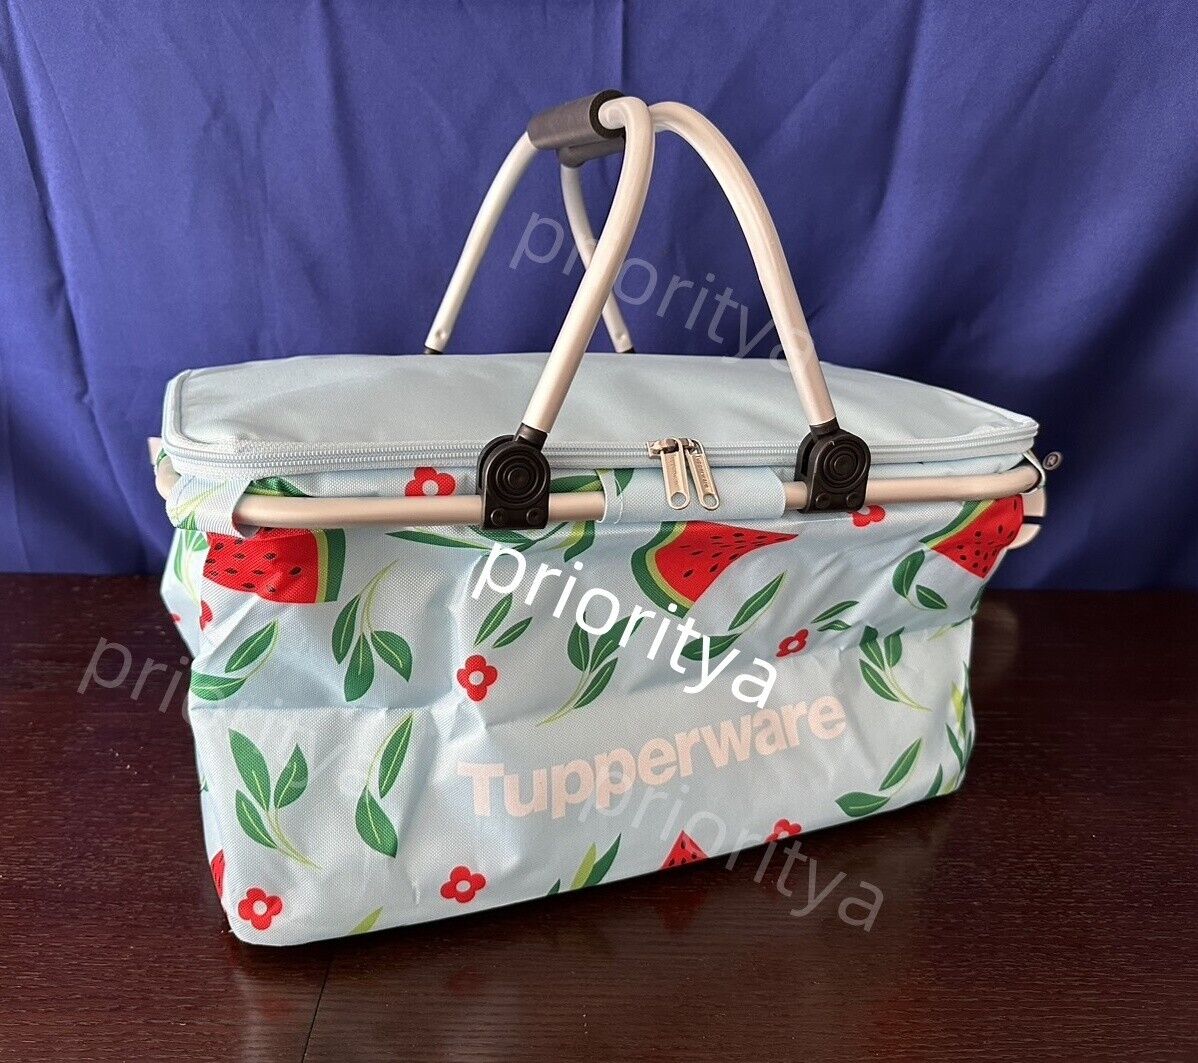 Tupperware Picnic Insulated Cooler Tote Folds Flat Basket Bag Watermelon New